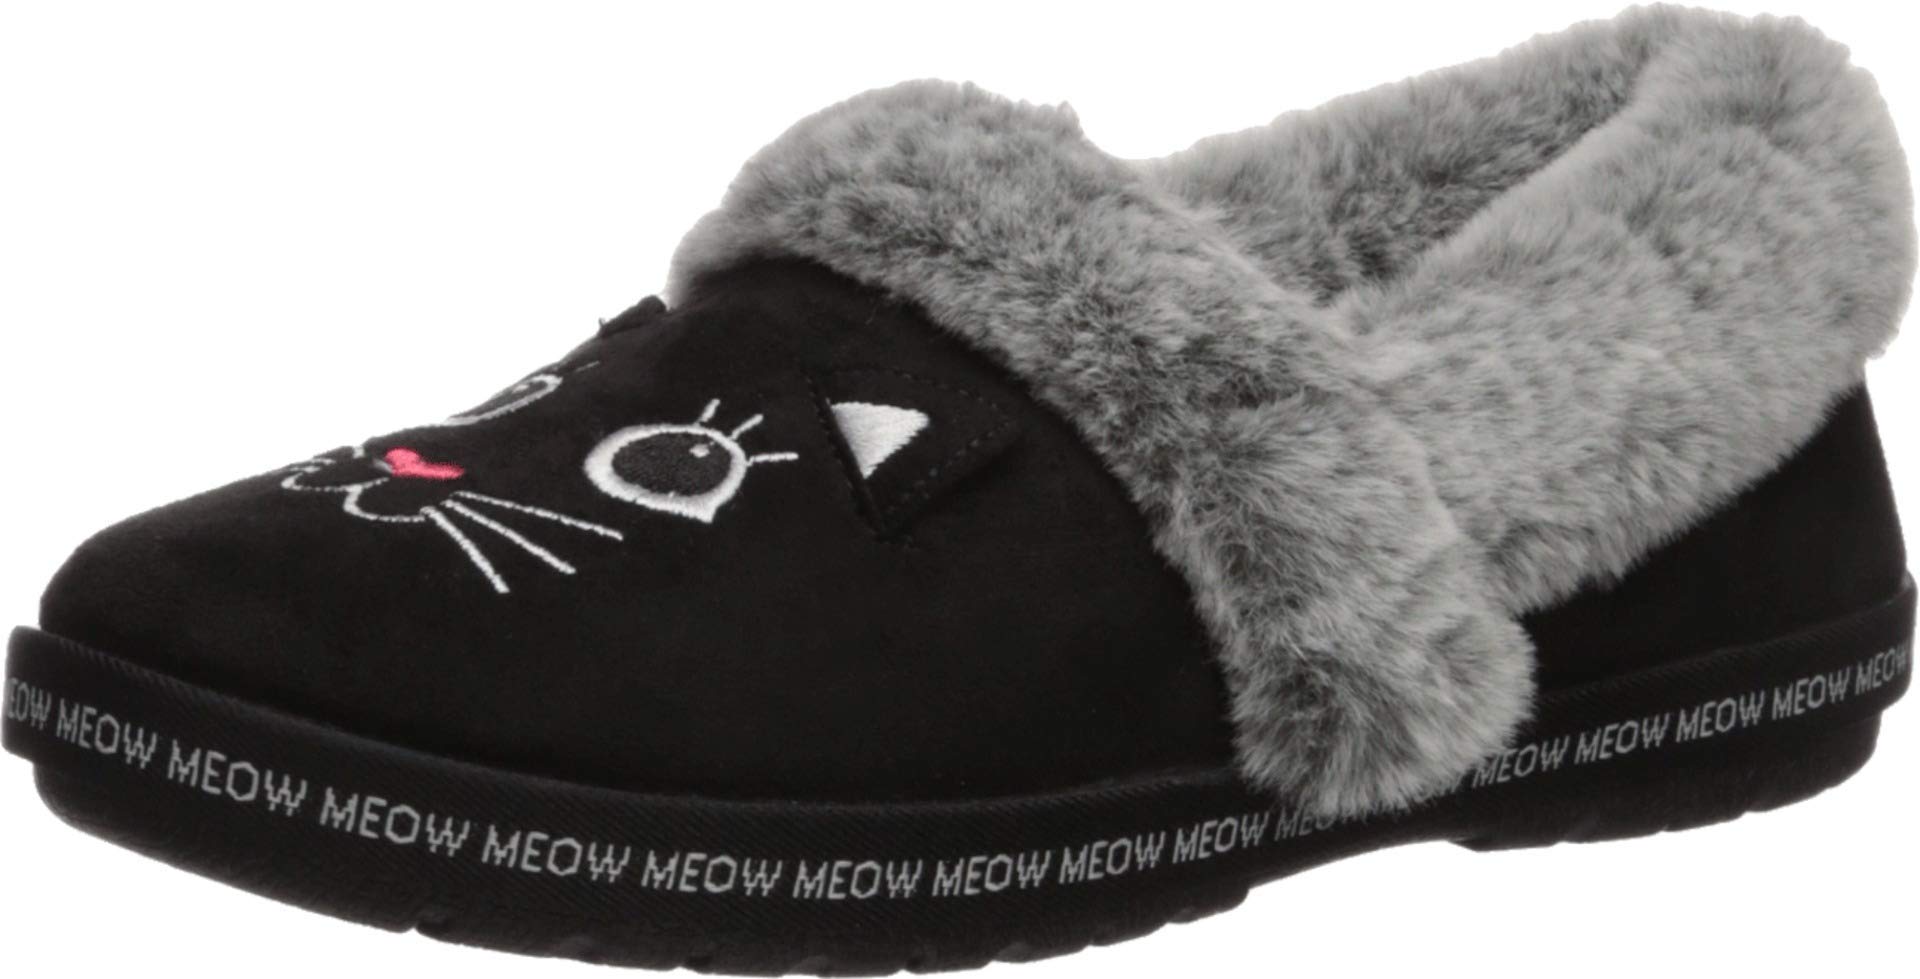 Skechers Women's Bobs Too Cozy Meow Pajamas Slippers (Black, Sizes 6-10) $15 + Free Shipping w/ Prime or on $35+